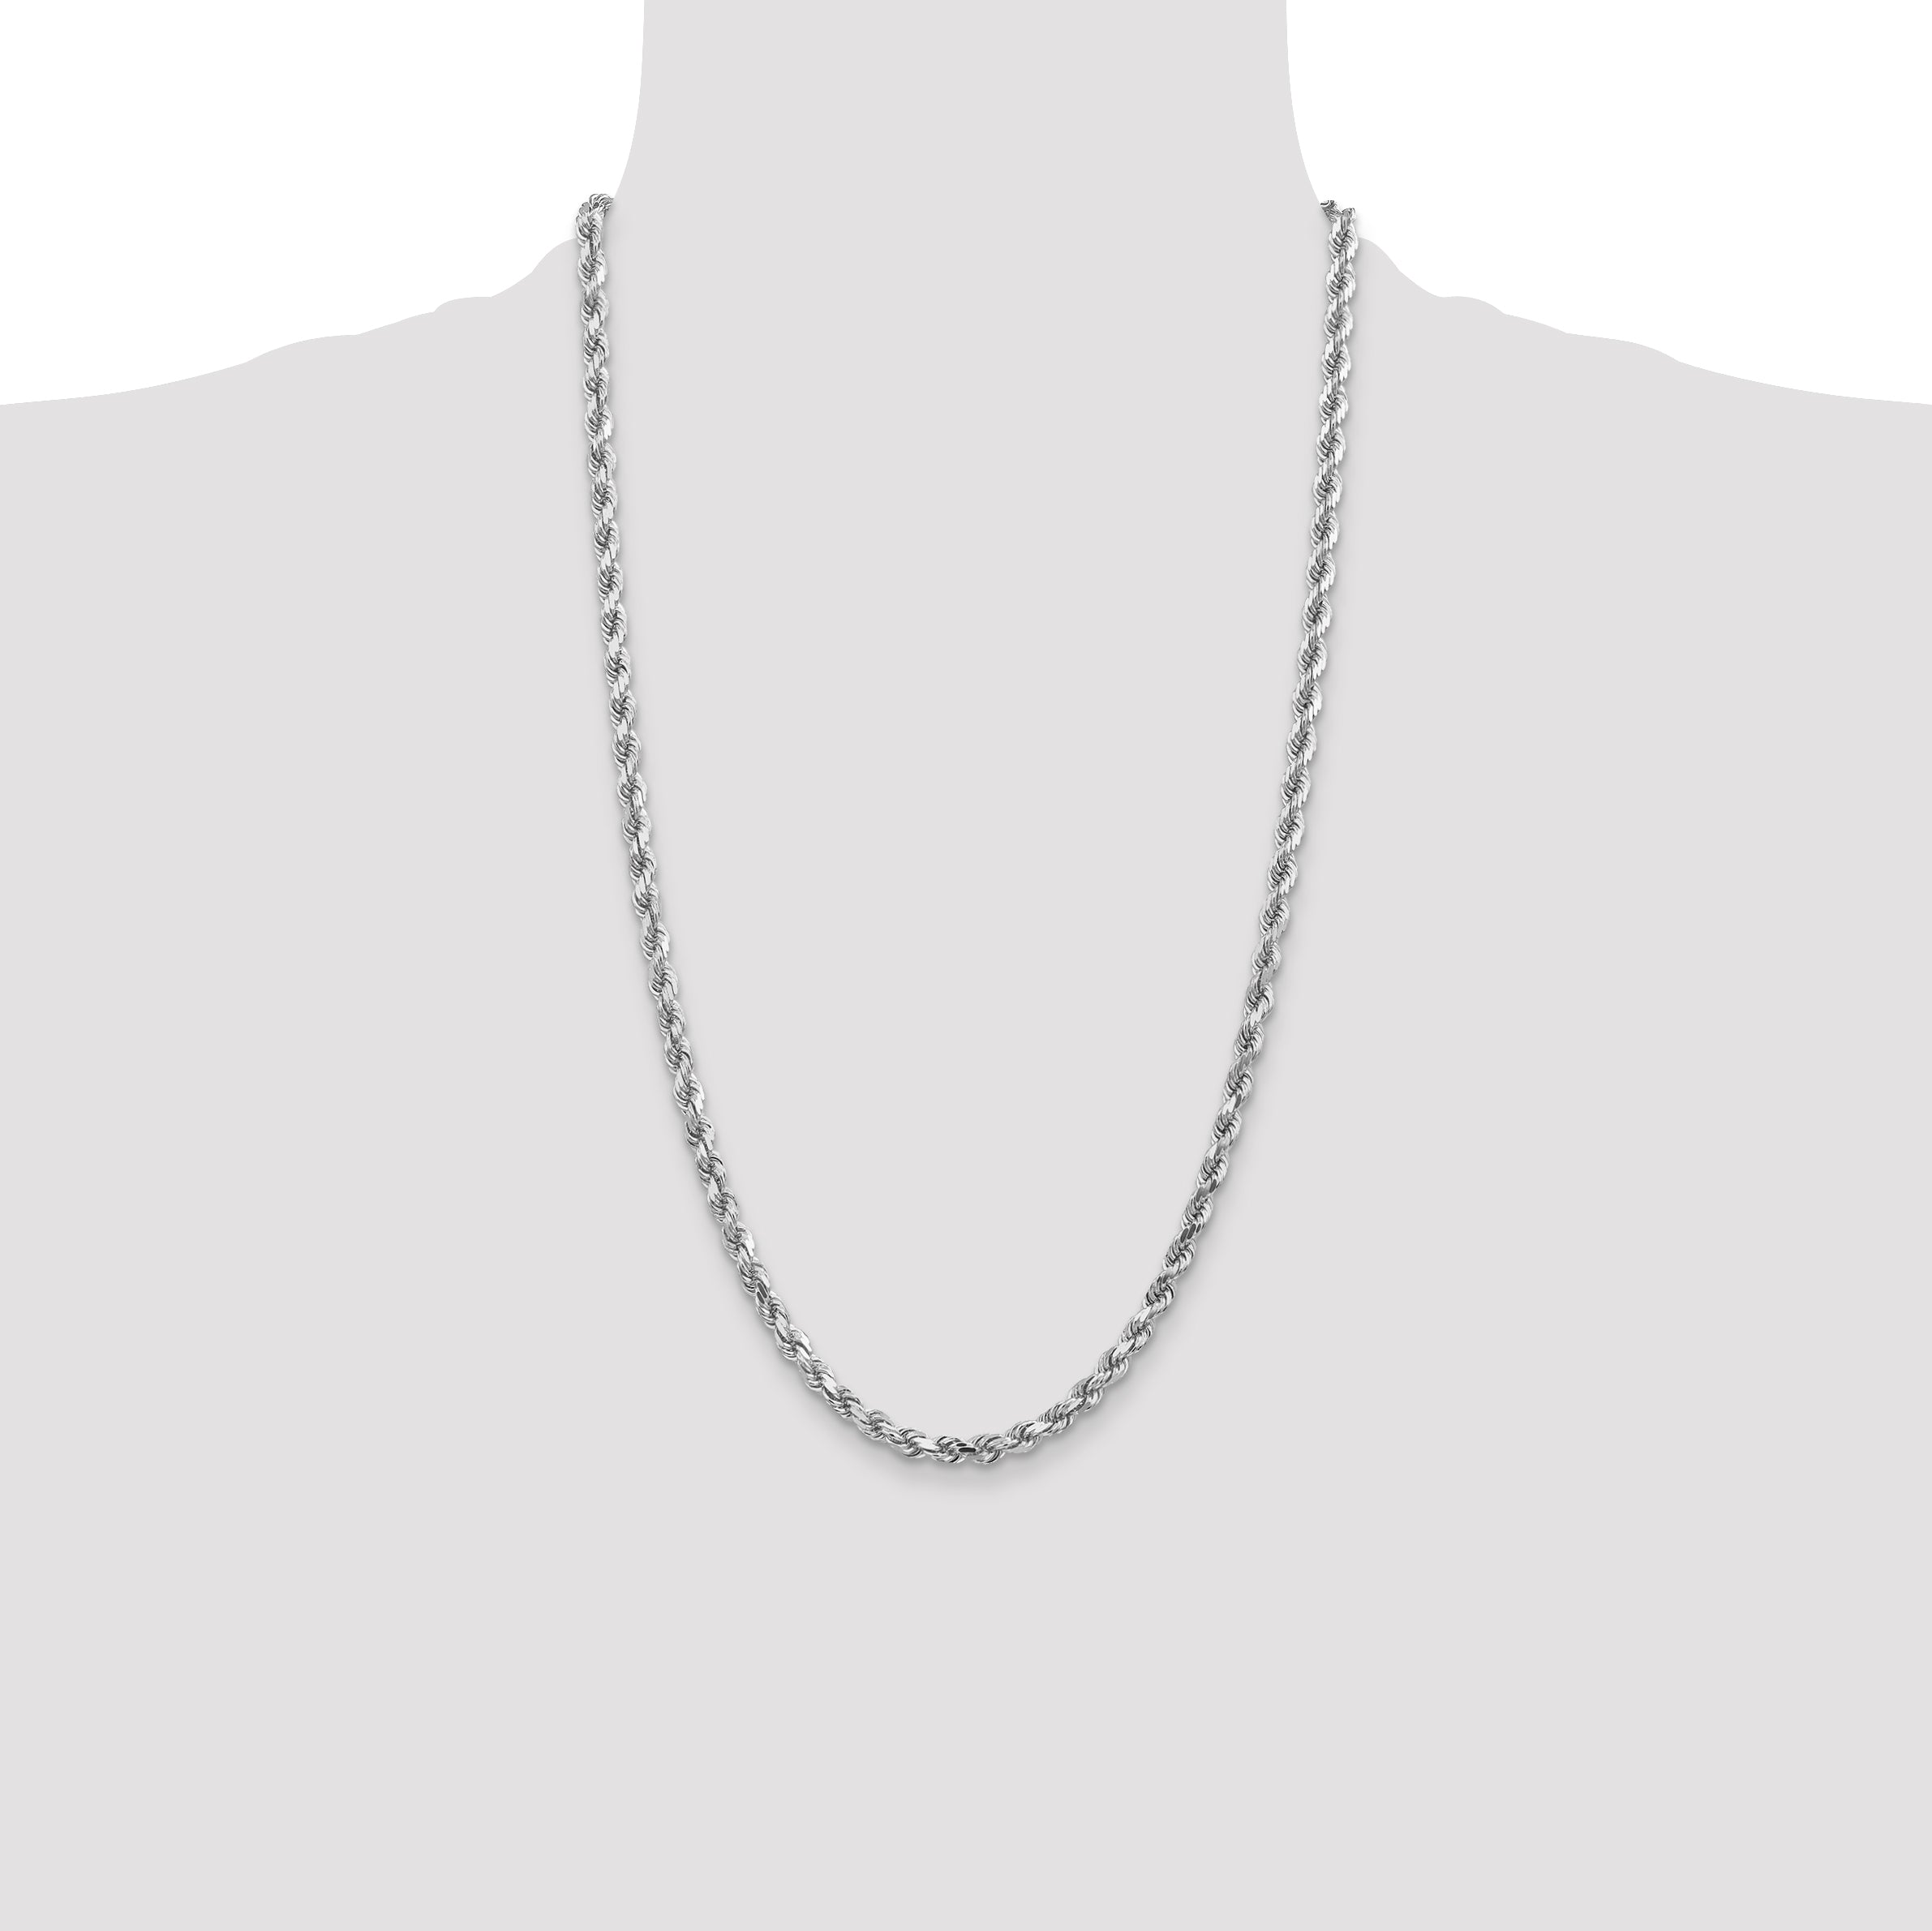 14K White Gold 18 inch 4.5mm Diamond-cut Rope with Lobster Clasp Chain